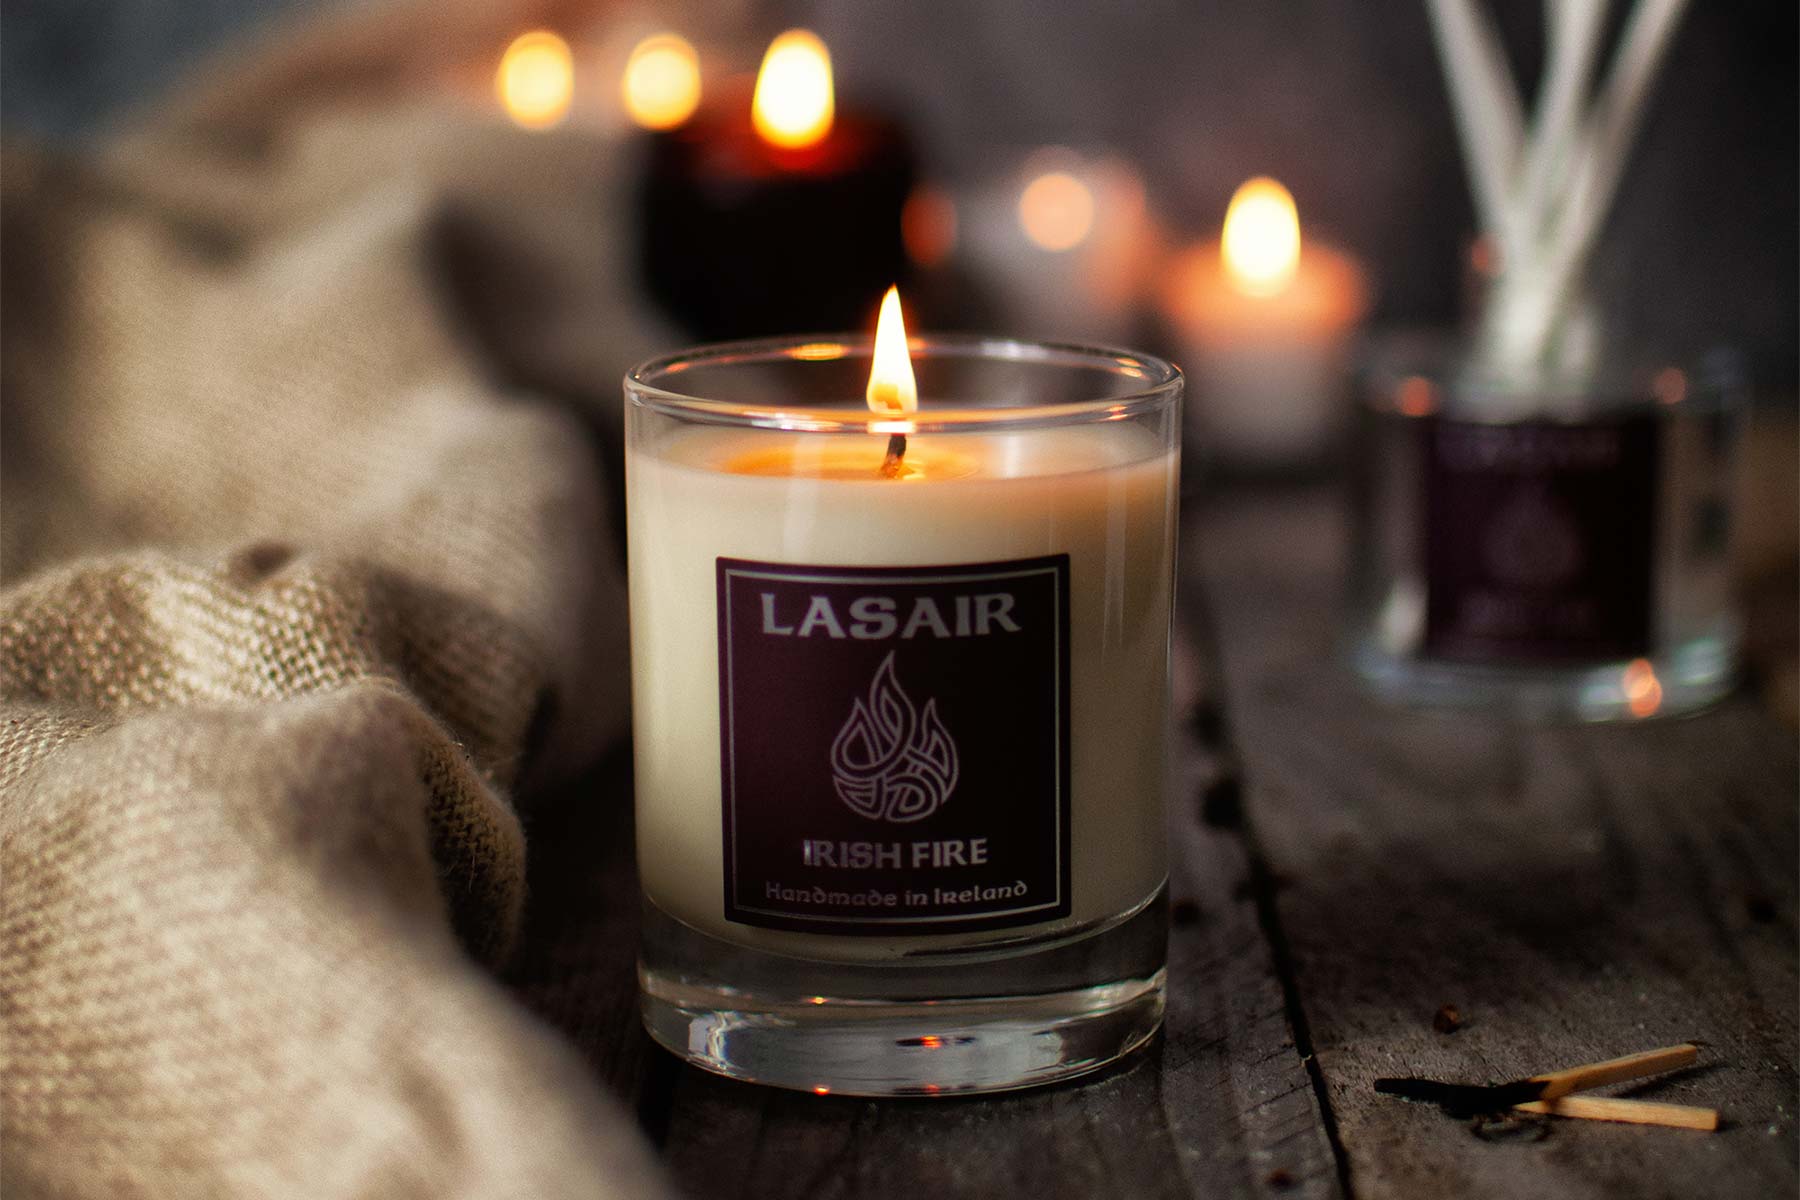 Irish Fire Candle and Scented Reed Diffusers Handmade in Ireland by Lasair Candles